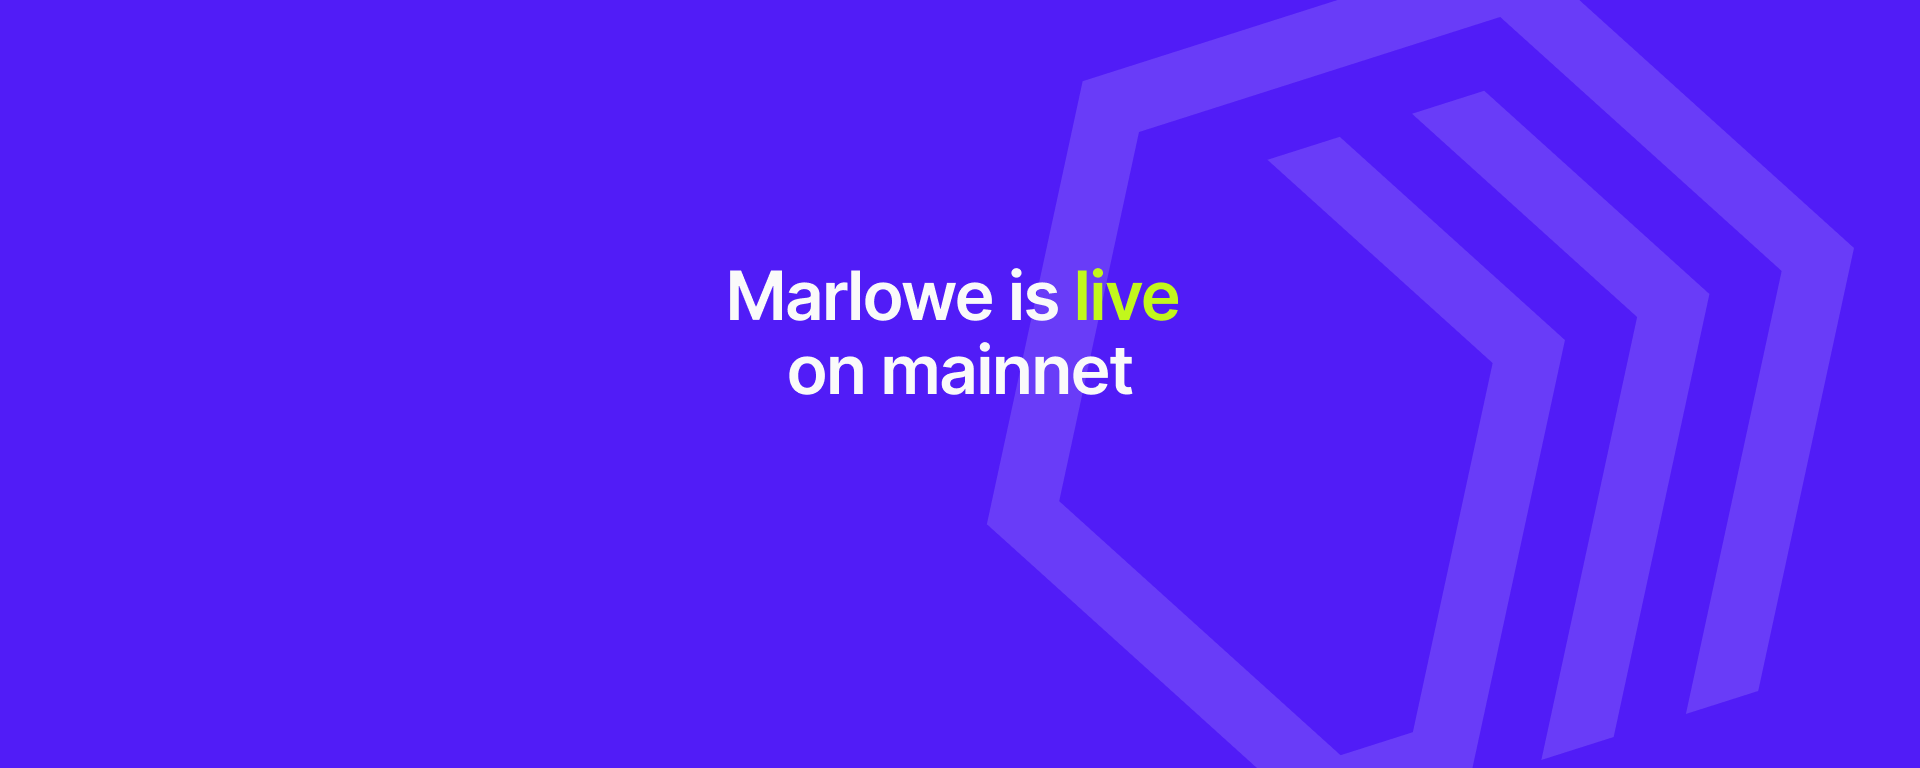 Marlowe goes live: be the first to explore the power of Marlowe's smart contract toolset